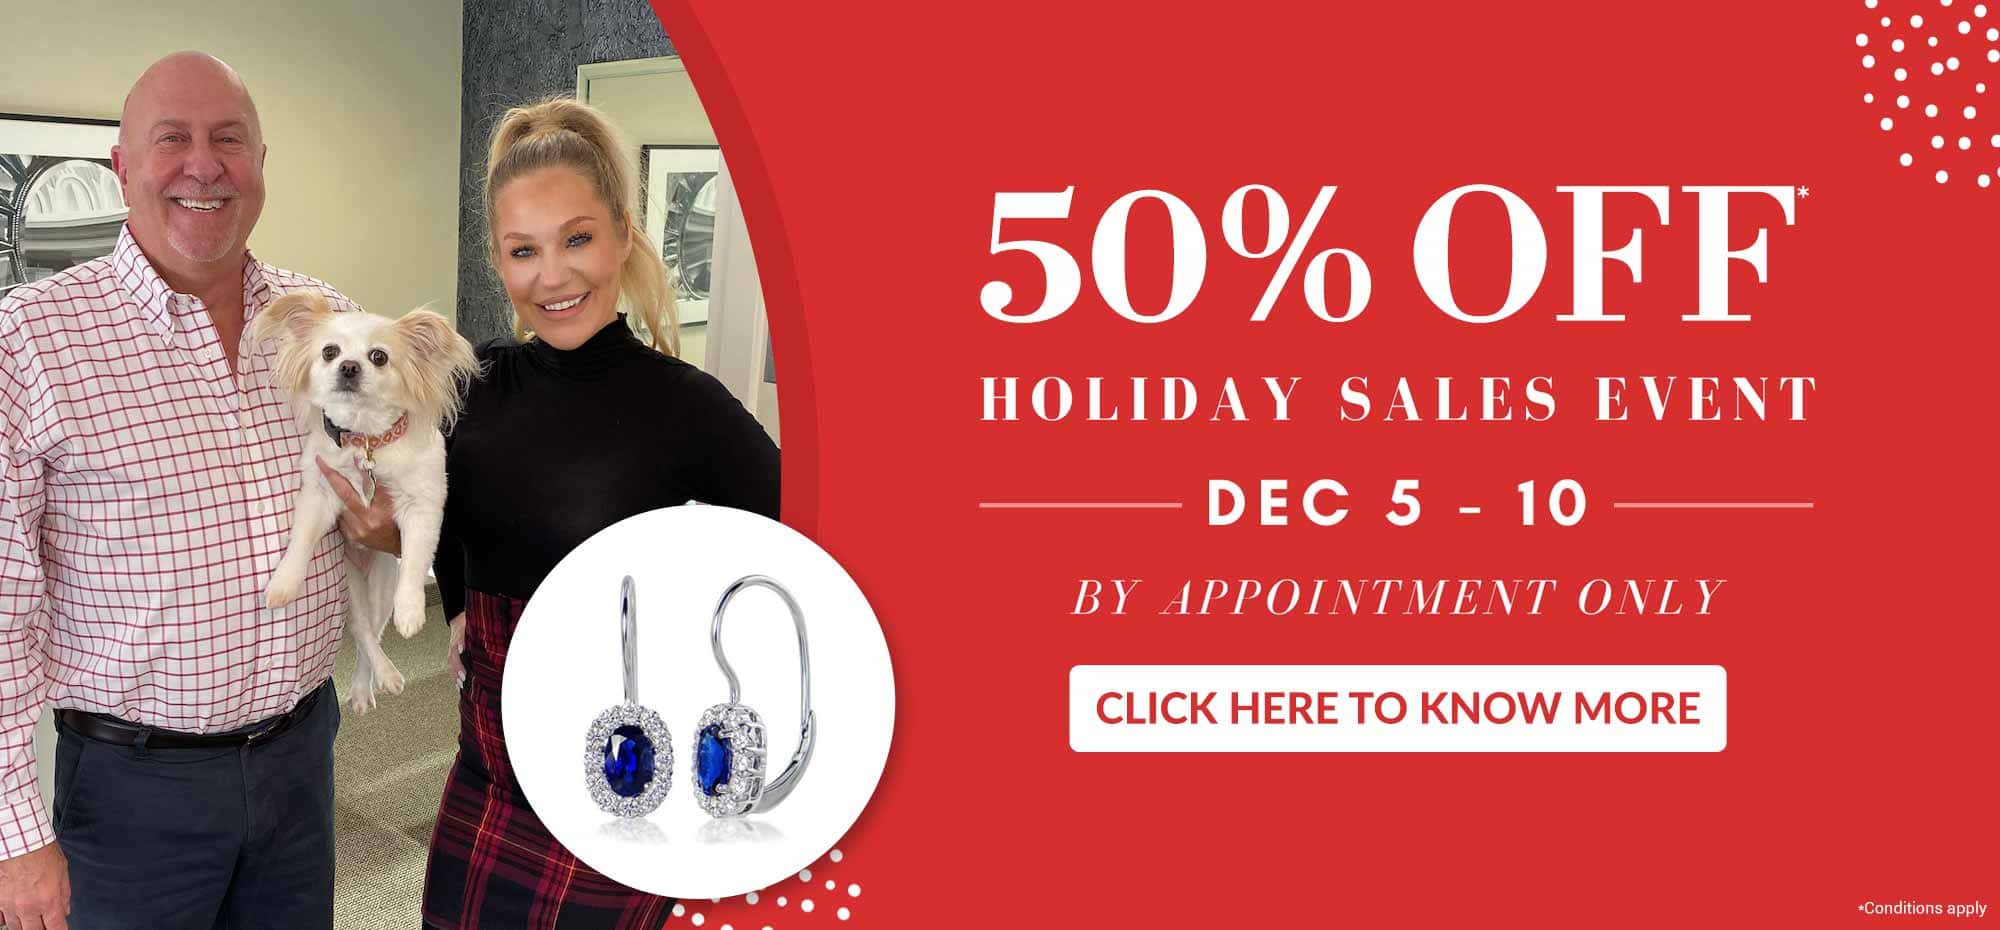 Holiday Sales at Stephens Fine Jewelry